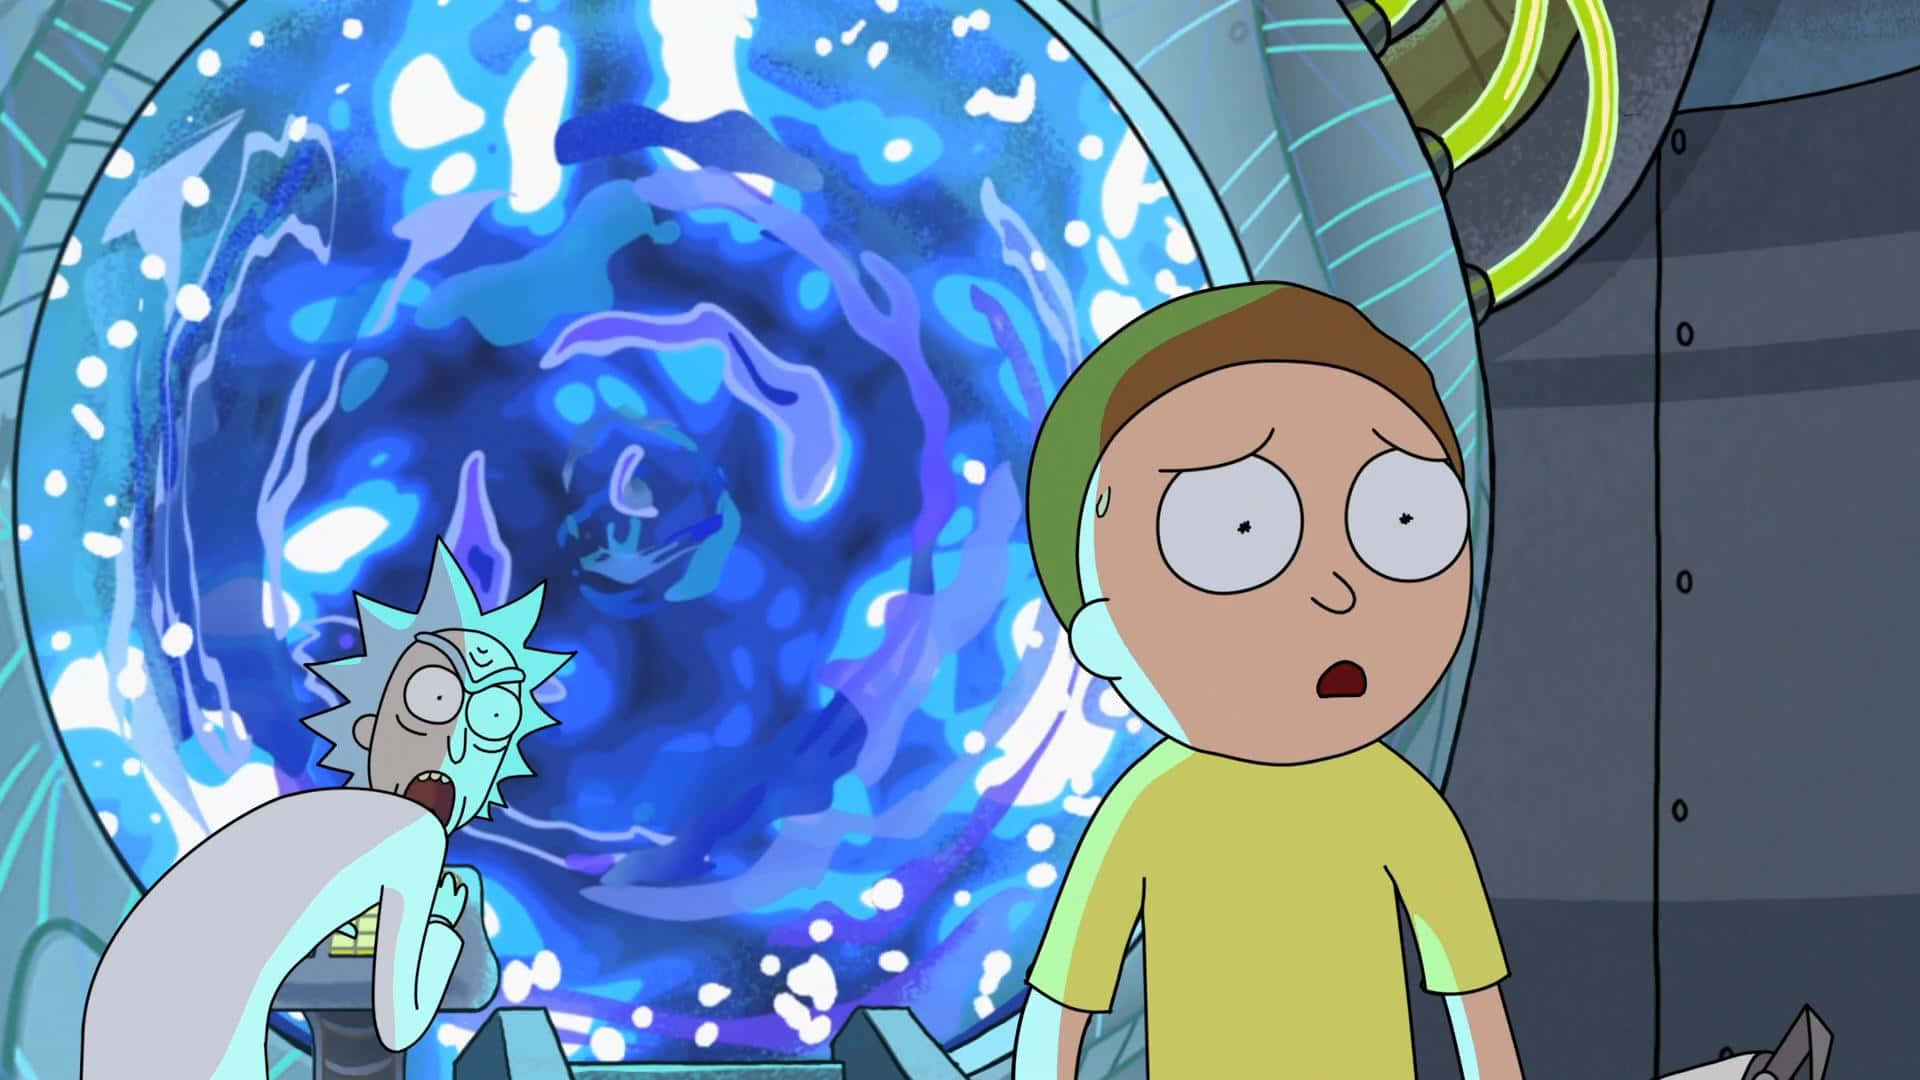 Rick And Morty In A Blue Space